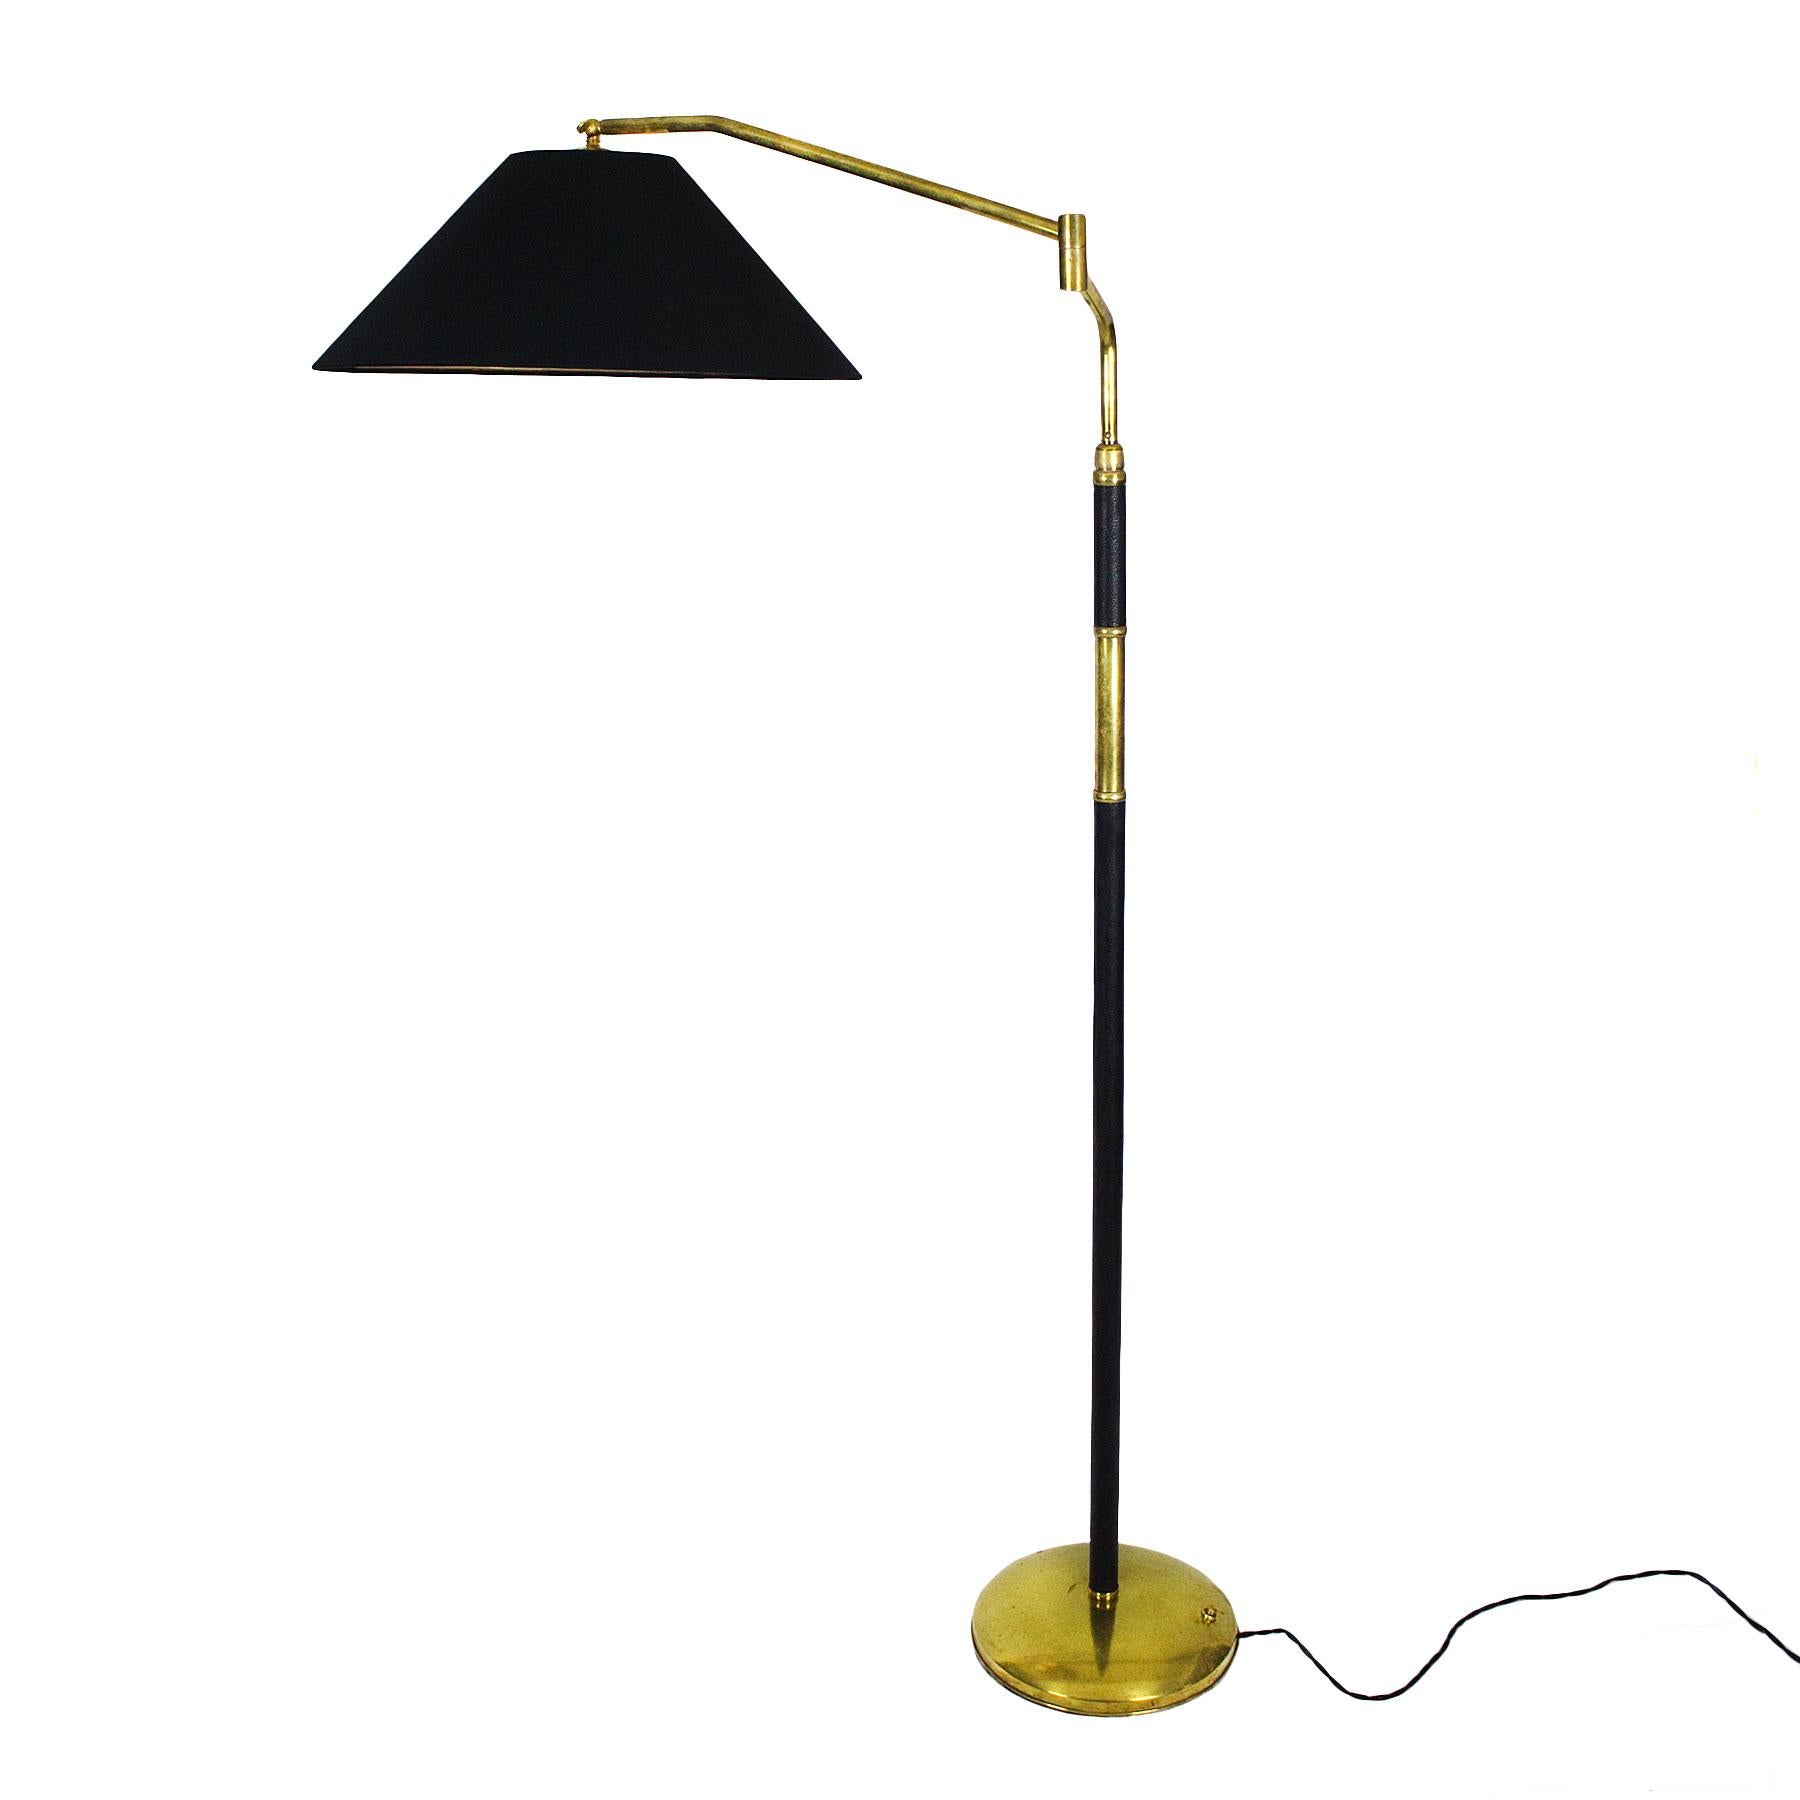 Italian Mid-Century Modern System Standing Lamp, Polished Brass and Leather - Italy For Sale